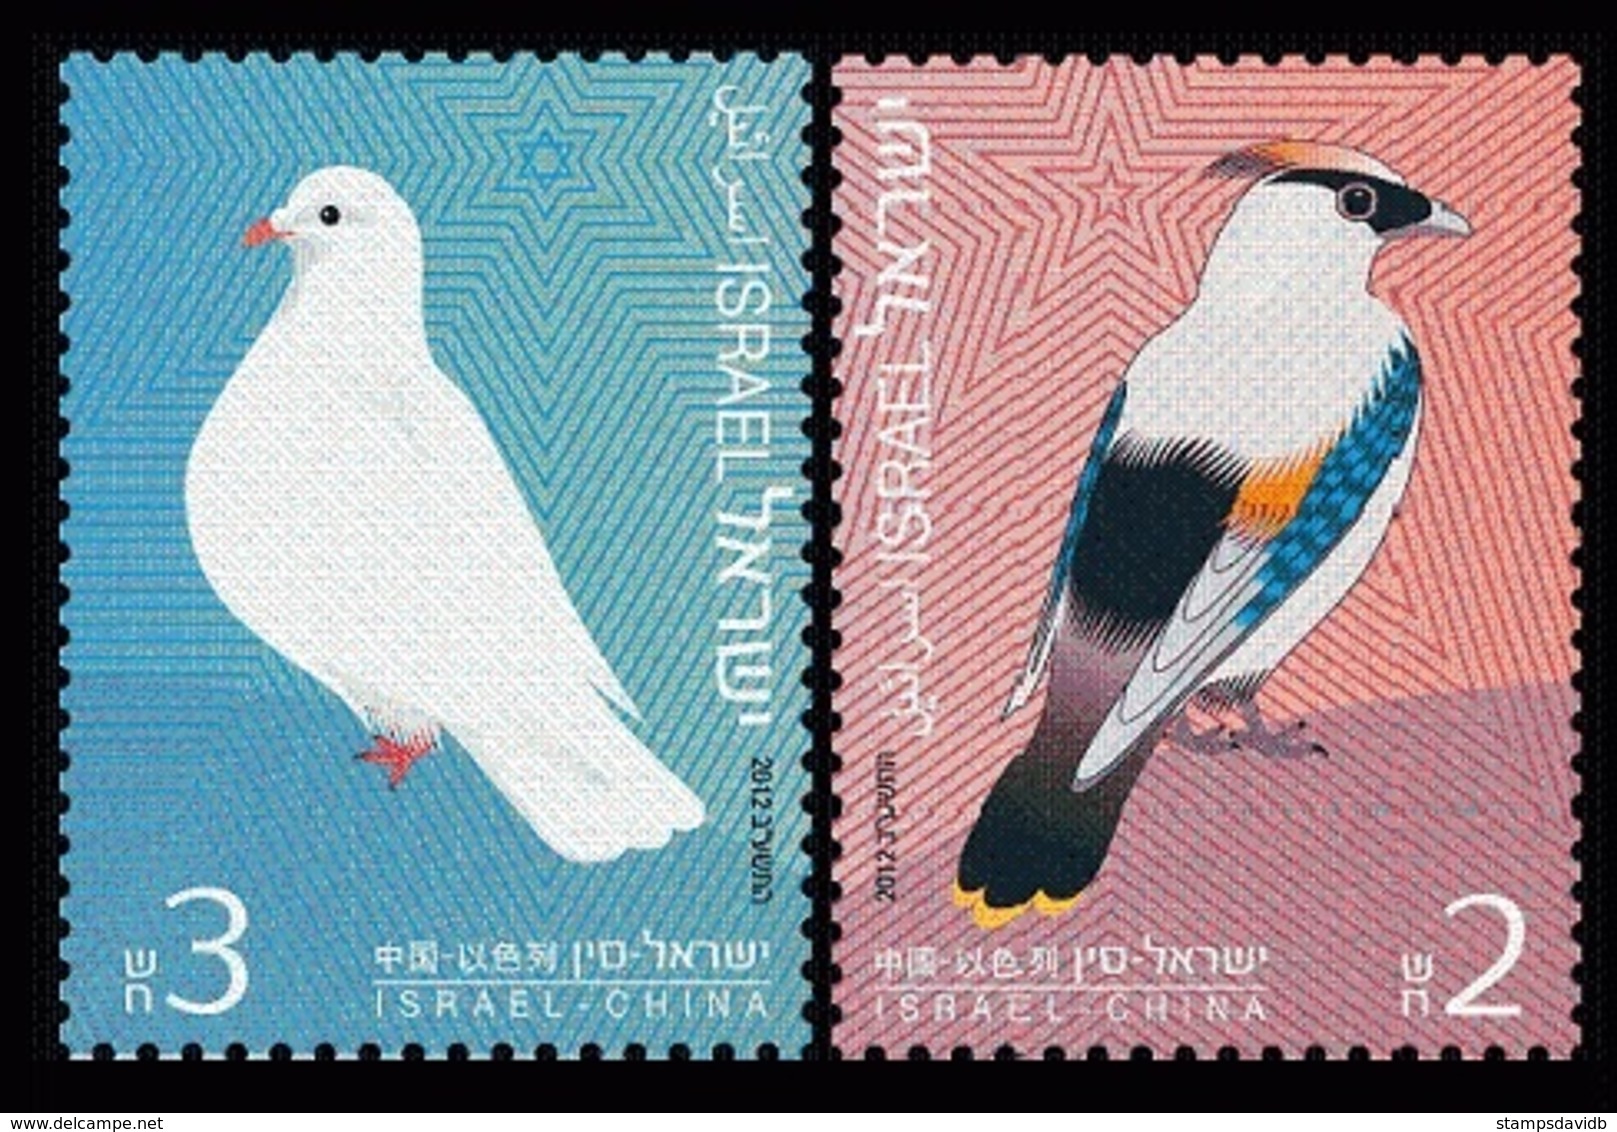 2012	Israel	2274-2275	Symbols Of Peace - Joint Issue Israel China - Autruches